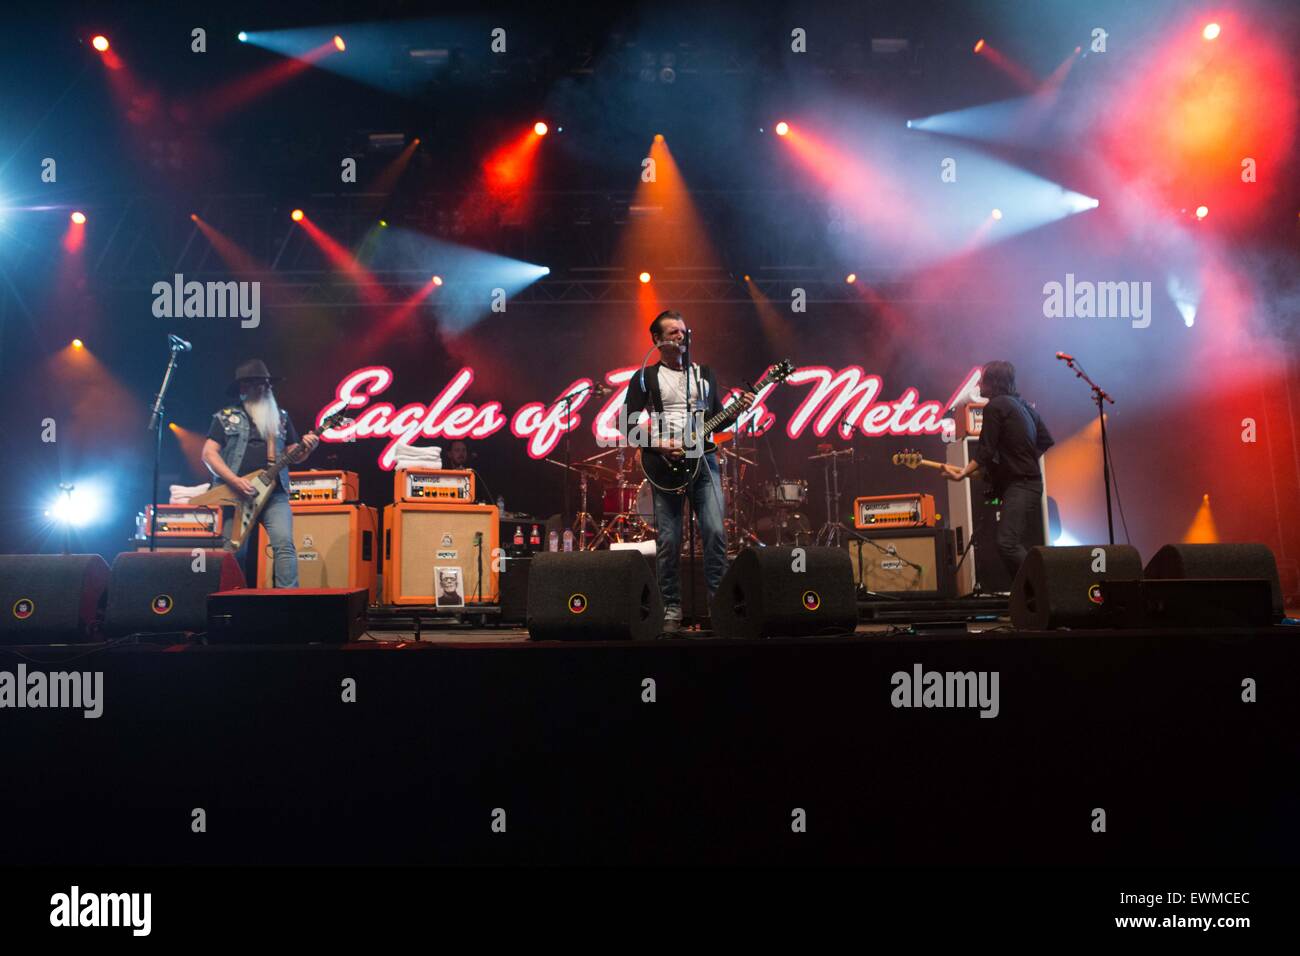 Eagles of Death Metal performs live at Pinkpop Festival 2015 in Netherlands © Roberto Finizio / Alamy Live News Stock Photo